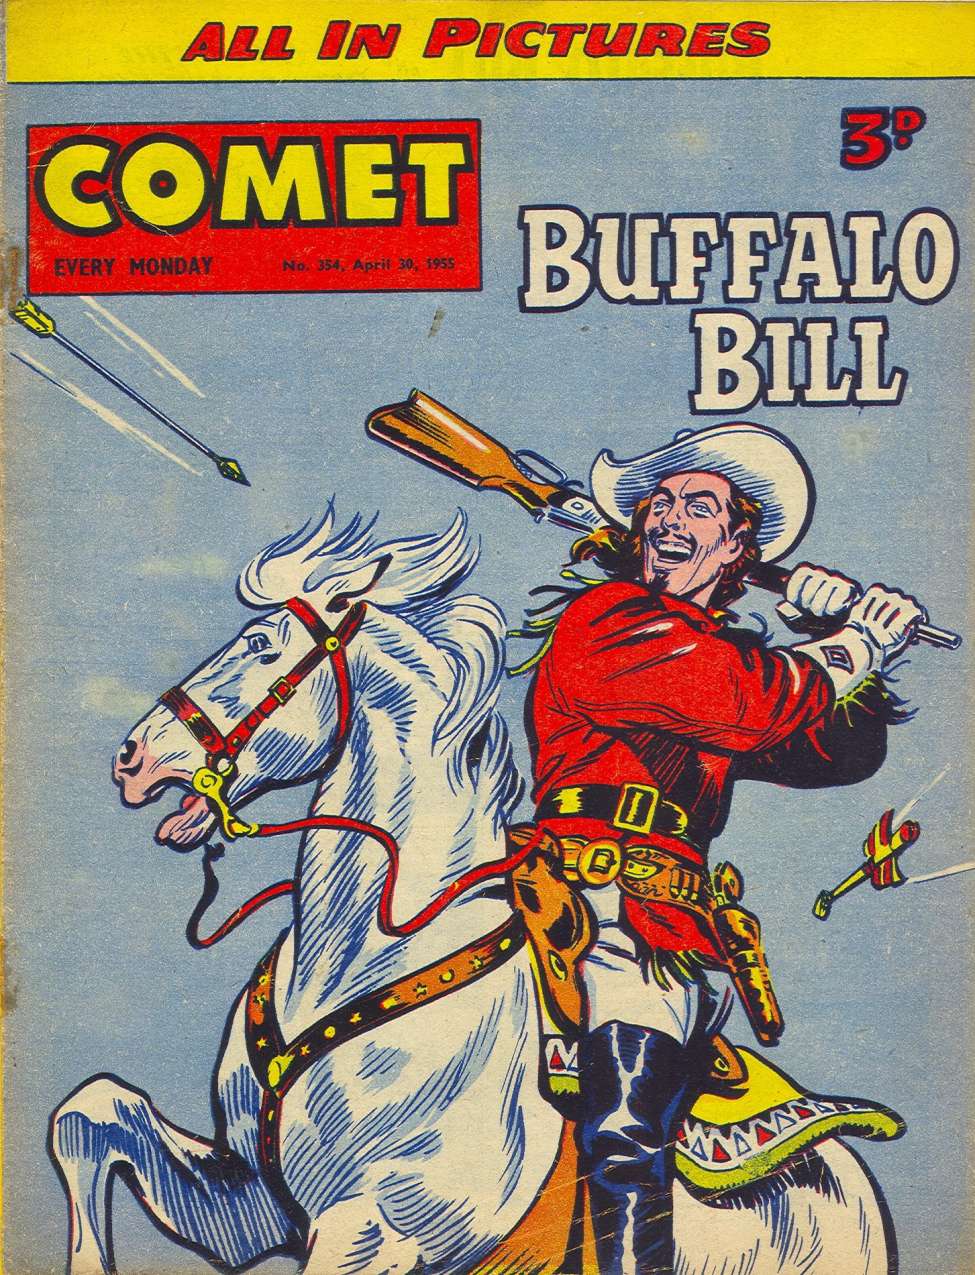 Comic Book Cover For The Comet 354